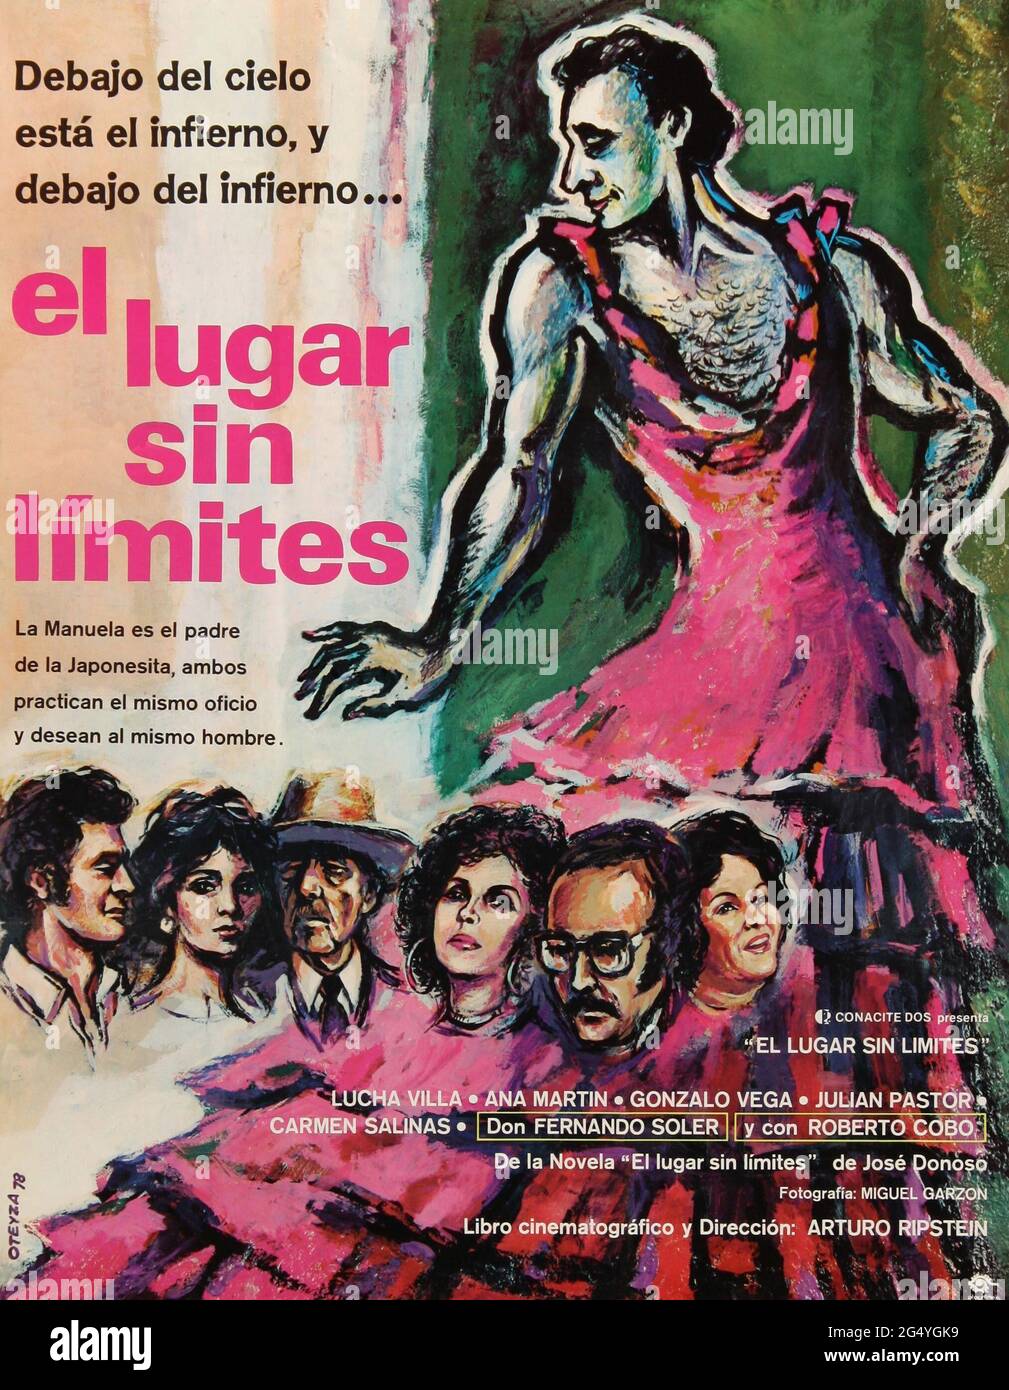 THE PLACE WITHOUT LIMITS (1978) -Original title: EL LUGAR SIN LIMITES-, directed by ARTURO RIPSTEIN. Stock Photo